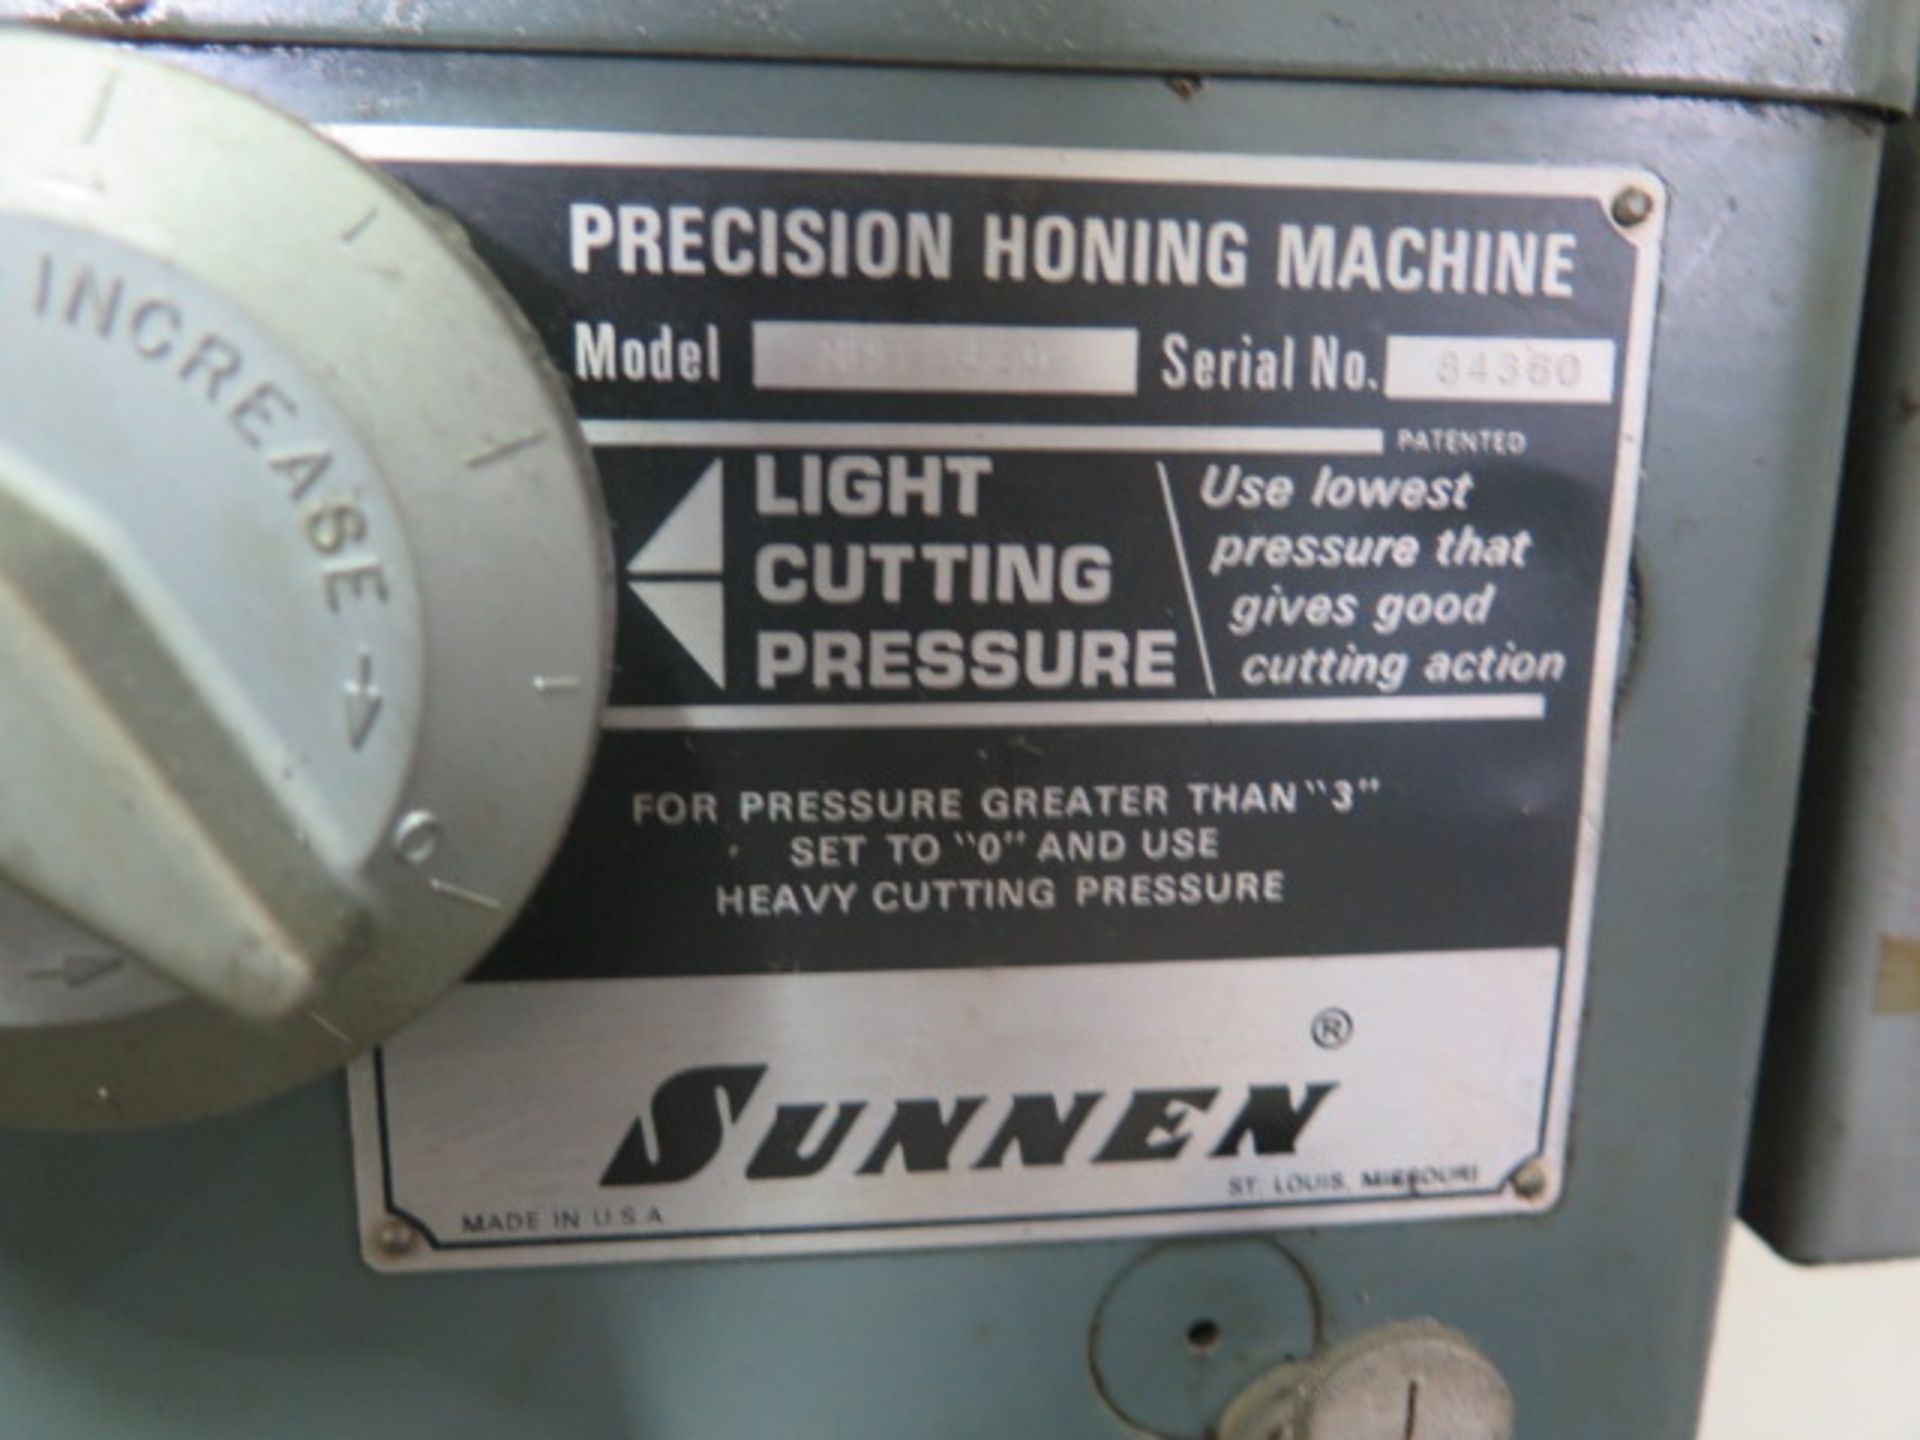 Sunnen MBB-1660 Precision Honing Machine s/n 84360 w/ Coolant (SOLD AS-IS - NO WARRANTY) - Image 8 of 8